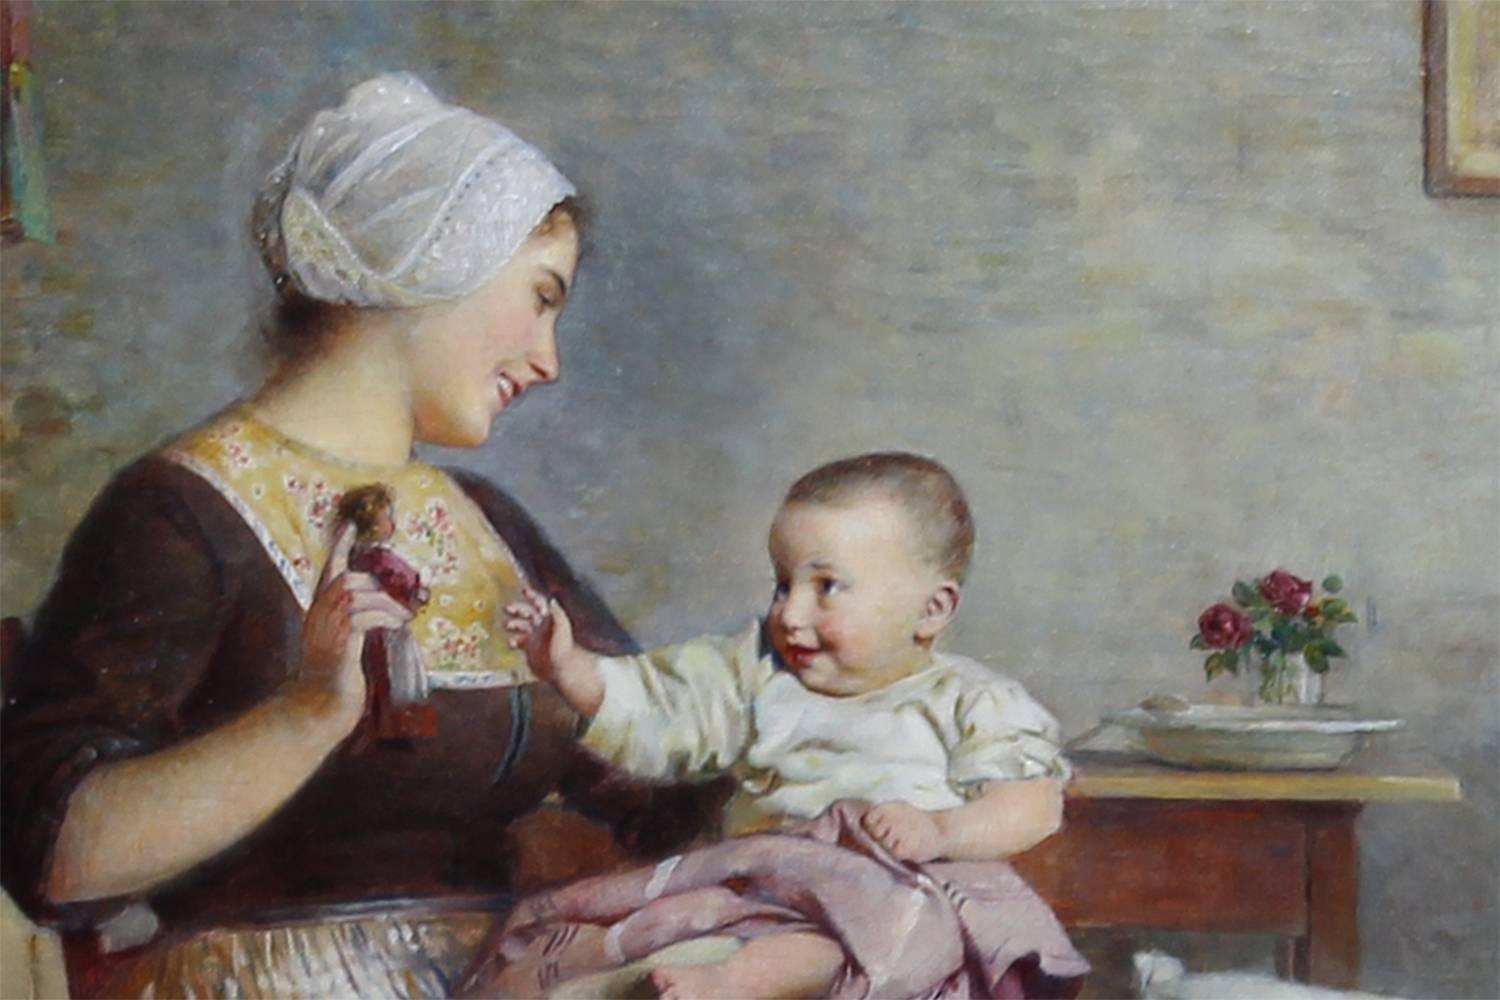 Mother and Child - Realist Painting by Edmund Adler